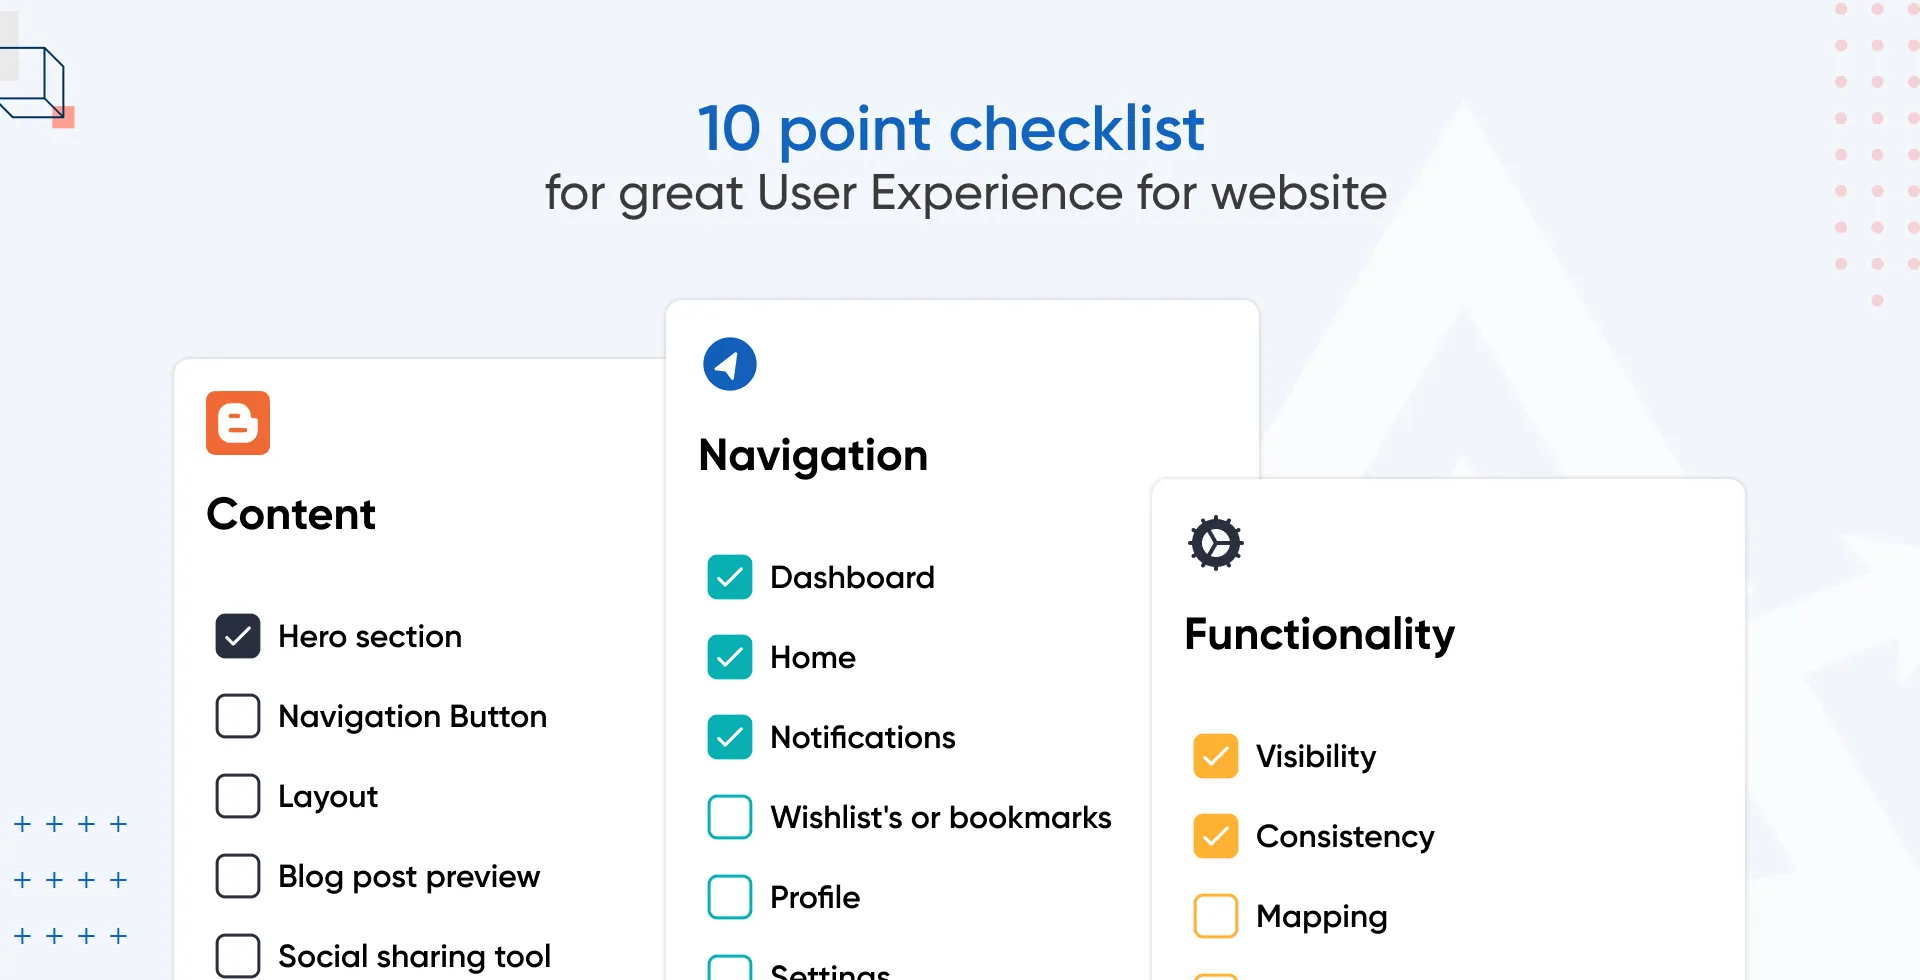 10 point checklist for great user experience for websites